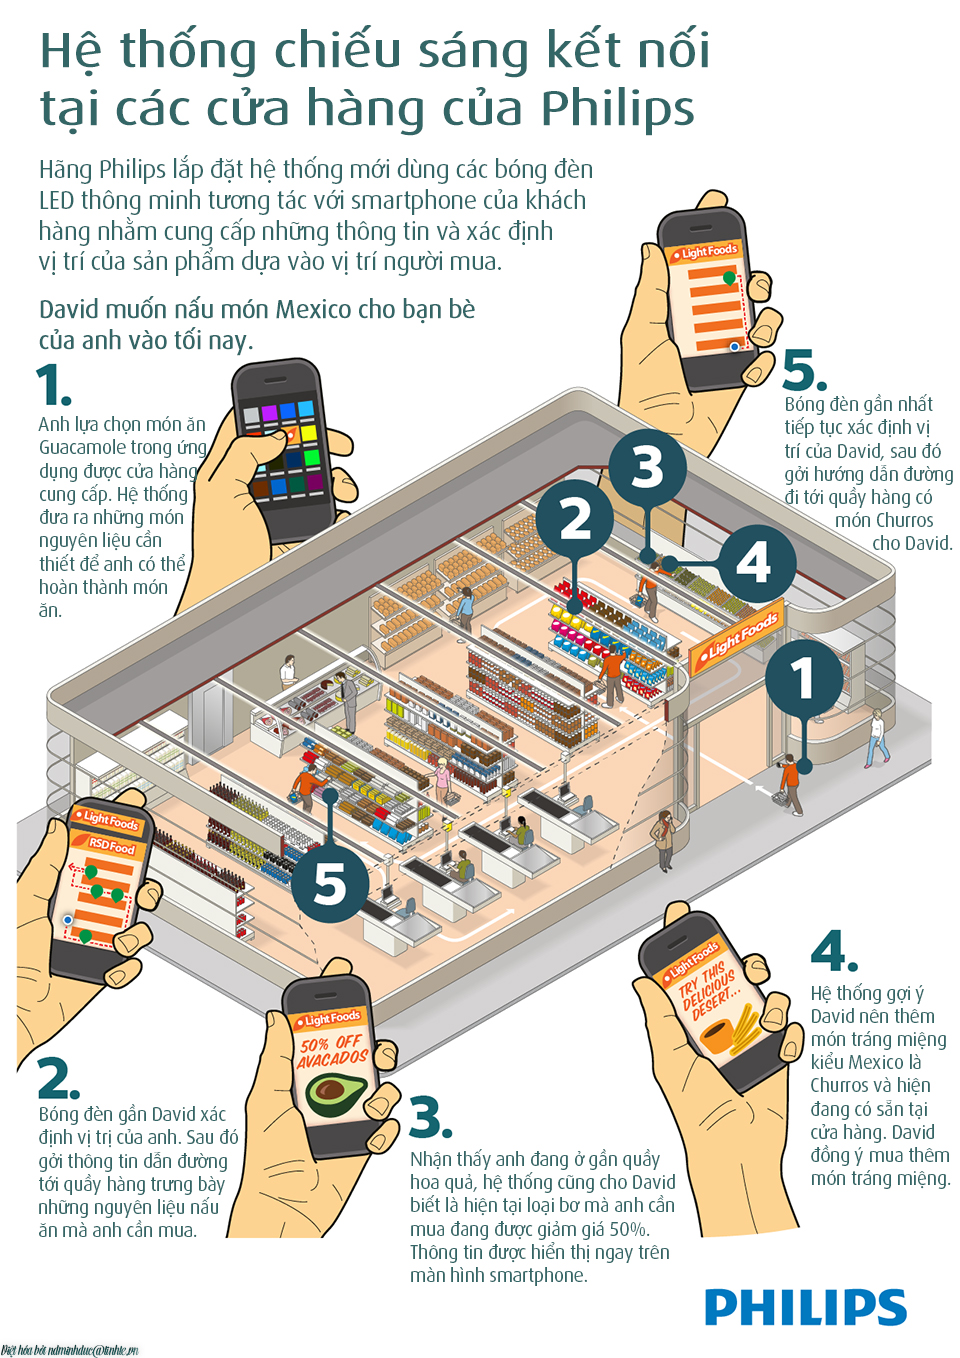 Philips-Connected-retail-lighting-system-infographic.jpg